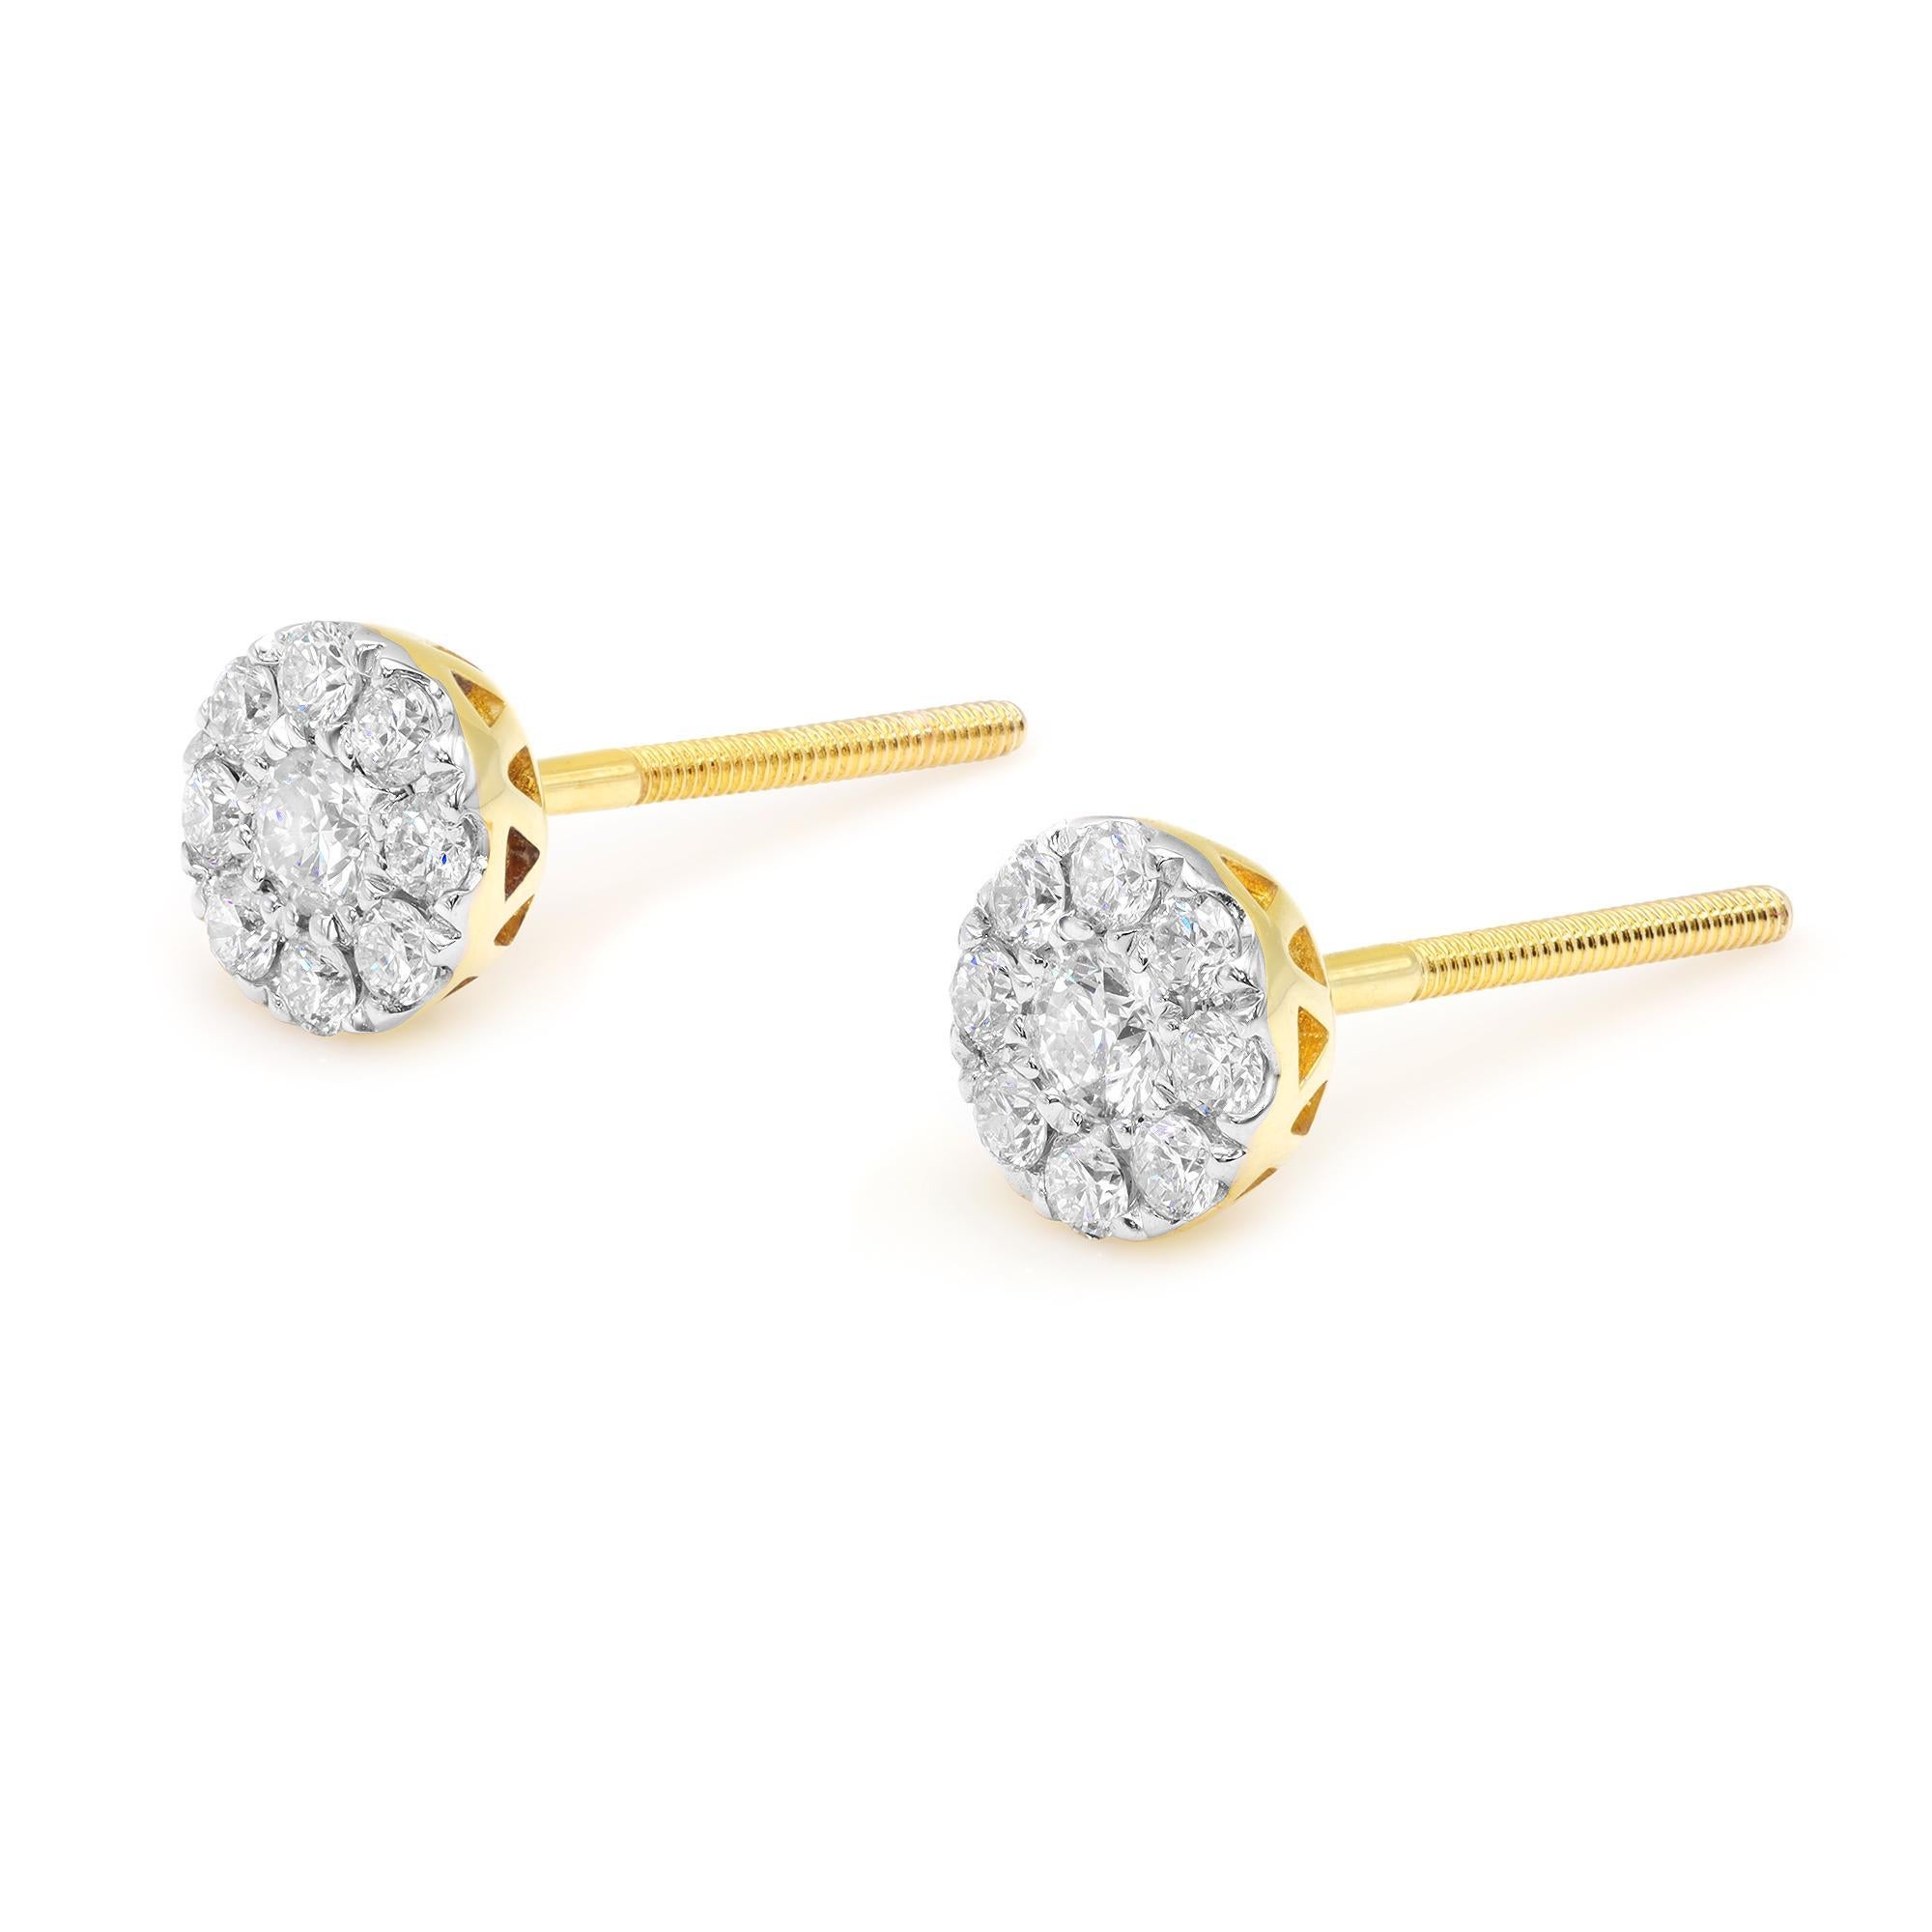 These delicate earrings feature natural dazzling diamond centers surrounded by a stunning halo of pave set diamonds. The setting allows the earring to sit flush with the ear for maximum comfort. Crafted in 14 yellow gold. Total diamond carat weight: